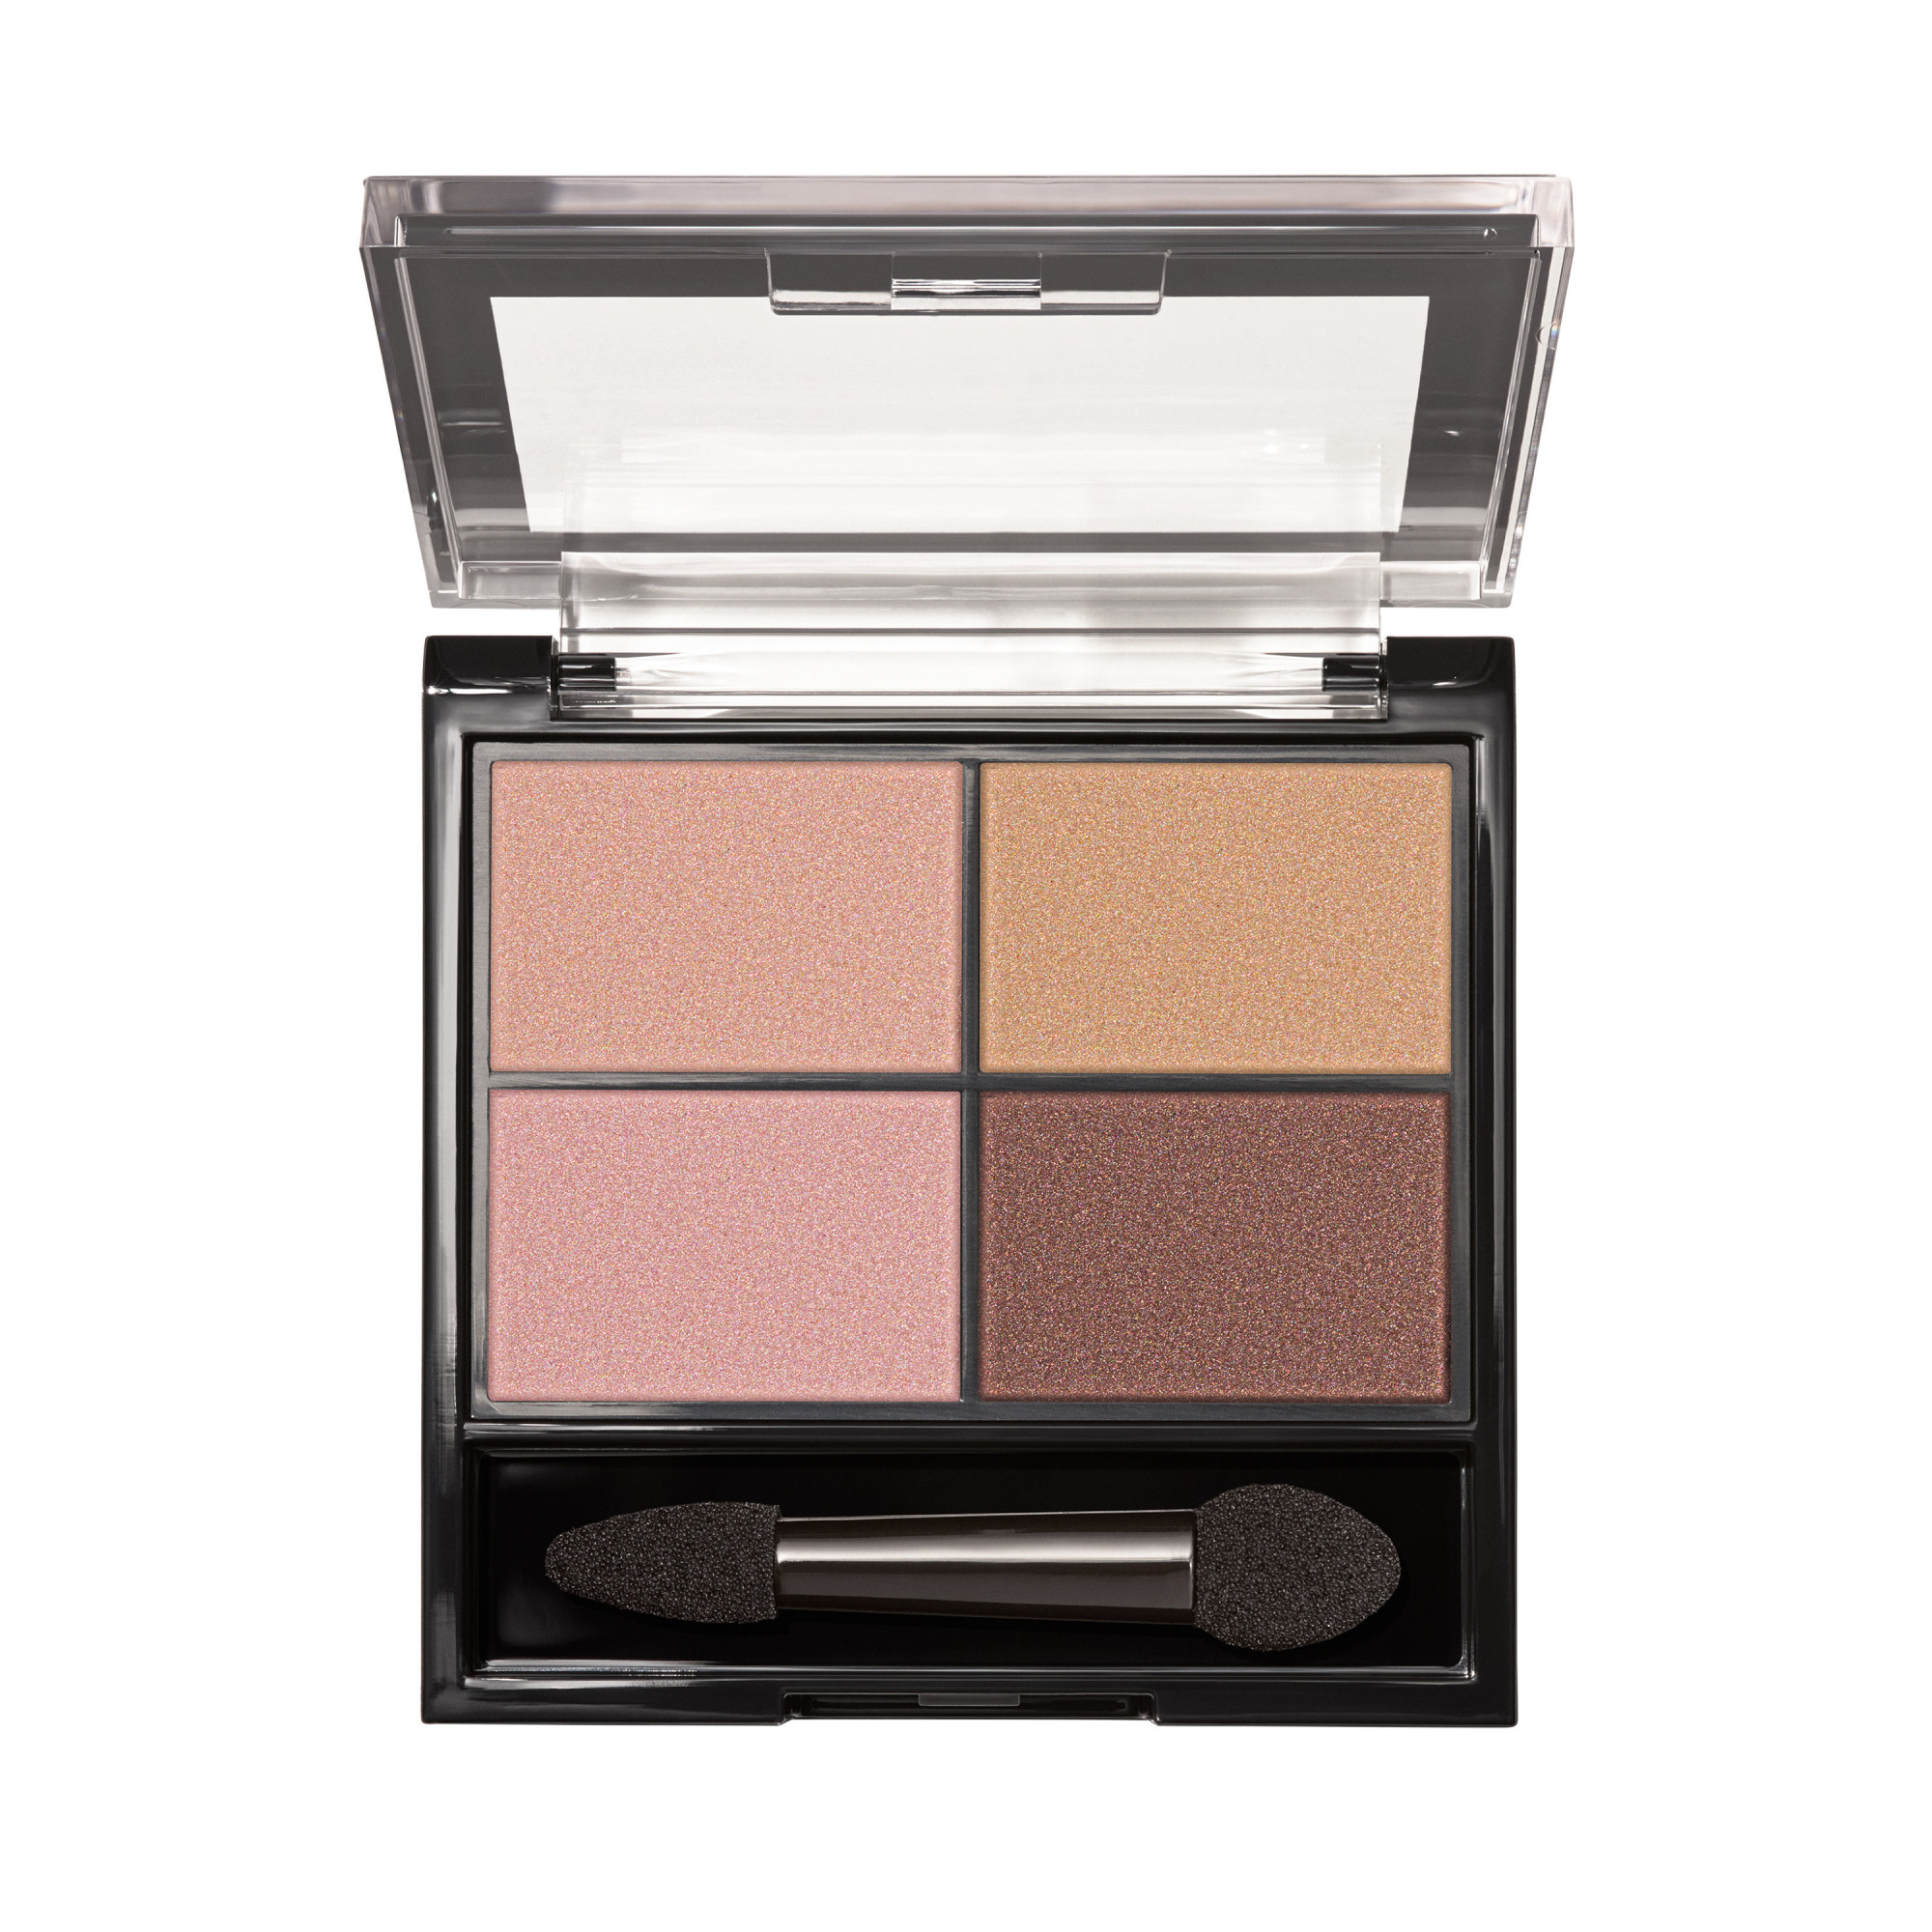 Revlon ColorStay Day to Night Eyeshadow Quad, Longwear Shadow Palette with Transitional Shades and Buttery Soft Feel, Crease & Smudge Proof, 505 Decadent, 0.16 oz - image 4 of 12